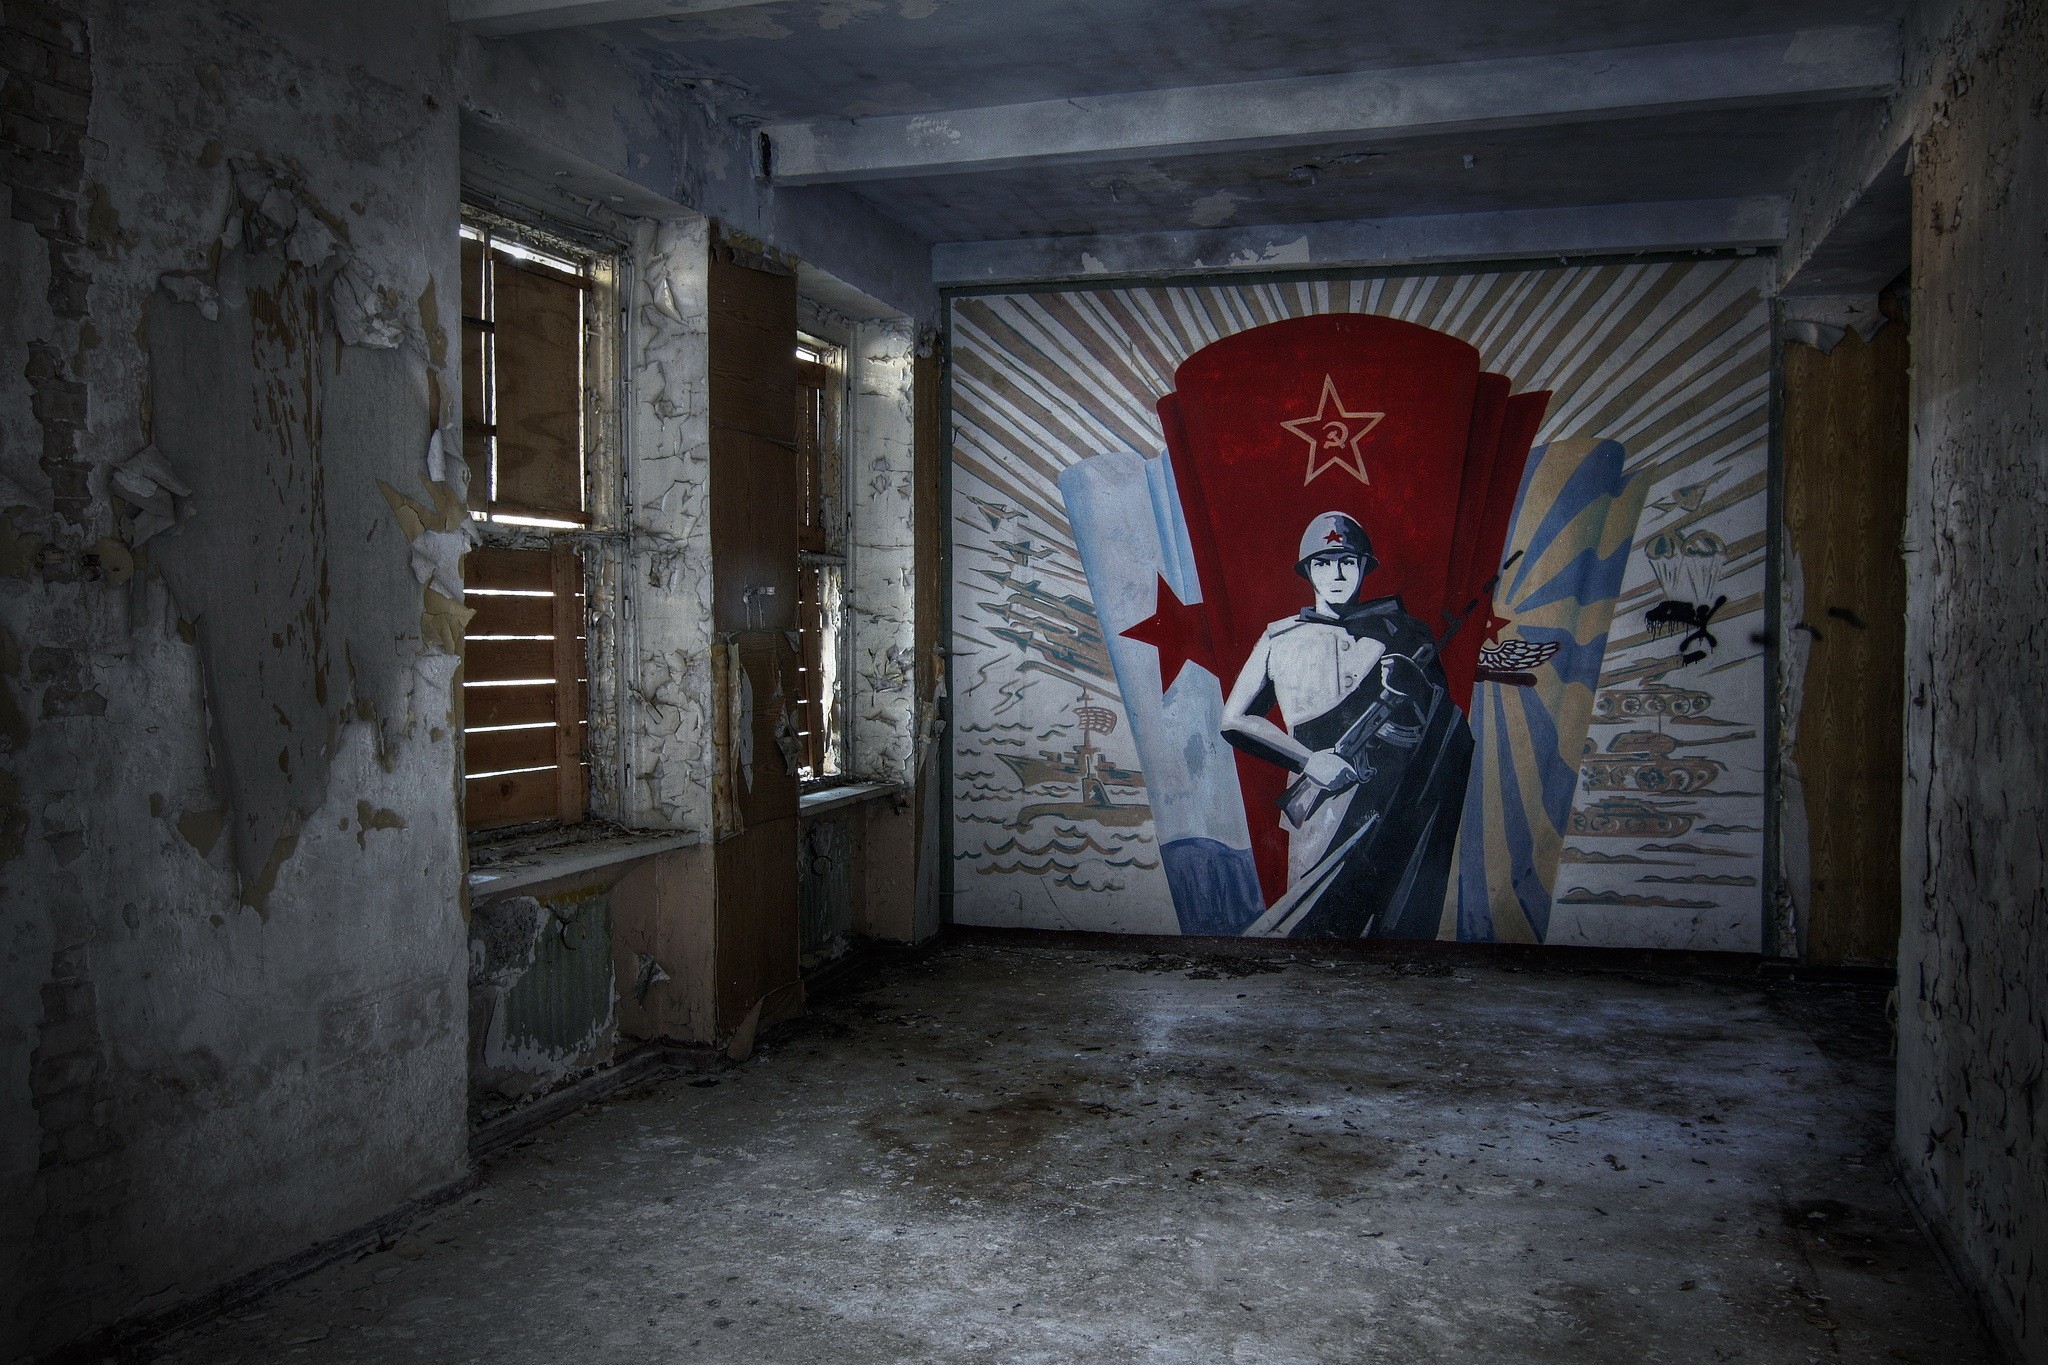 General 2048x1365 architecture interior abandoned wall window communism USSR soldier flag graffiti